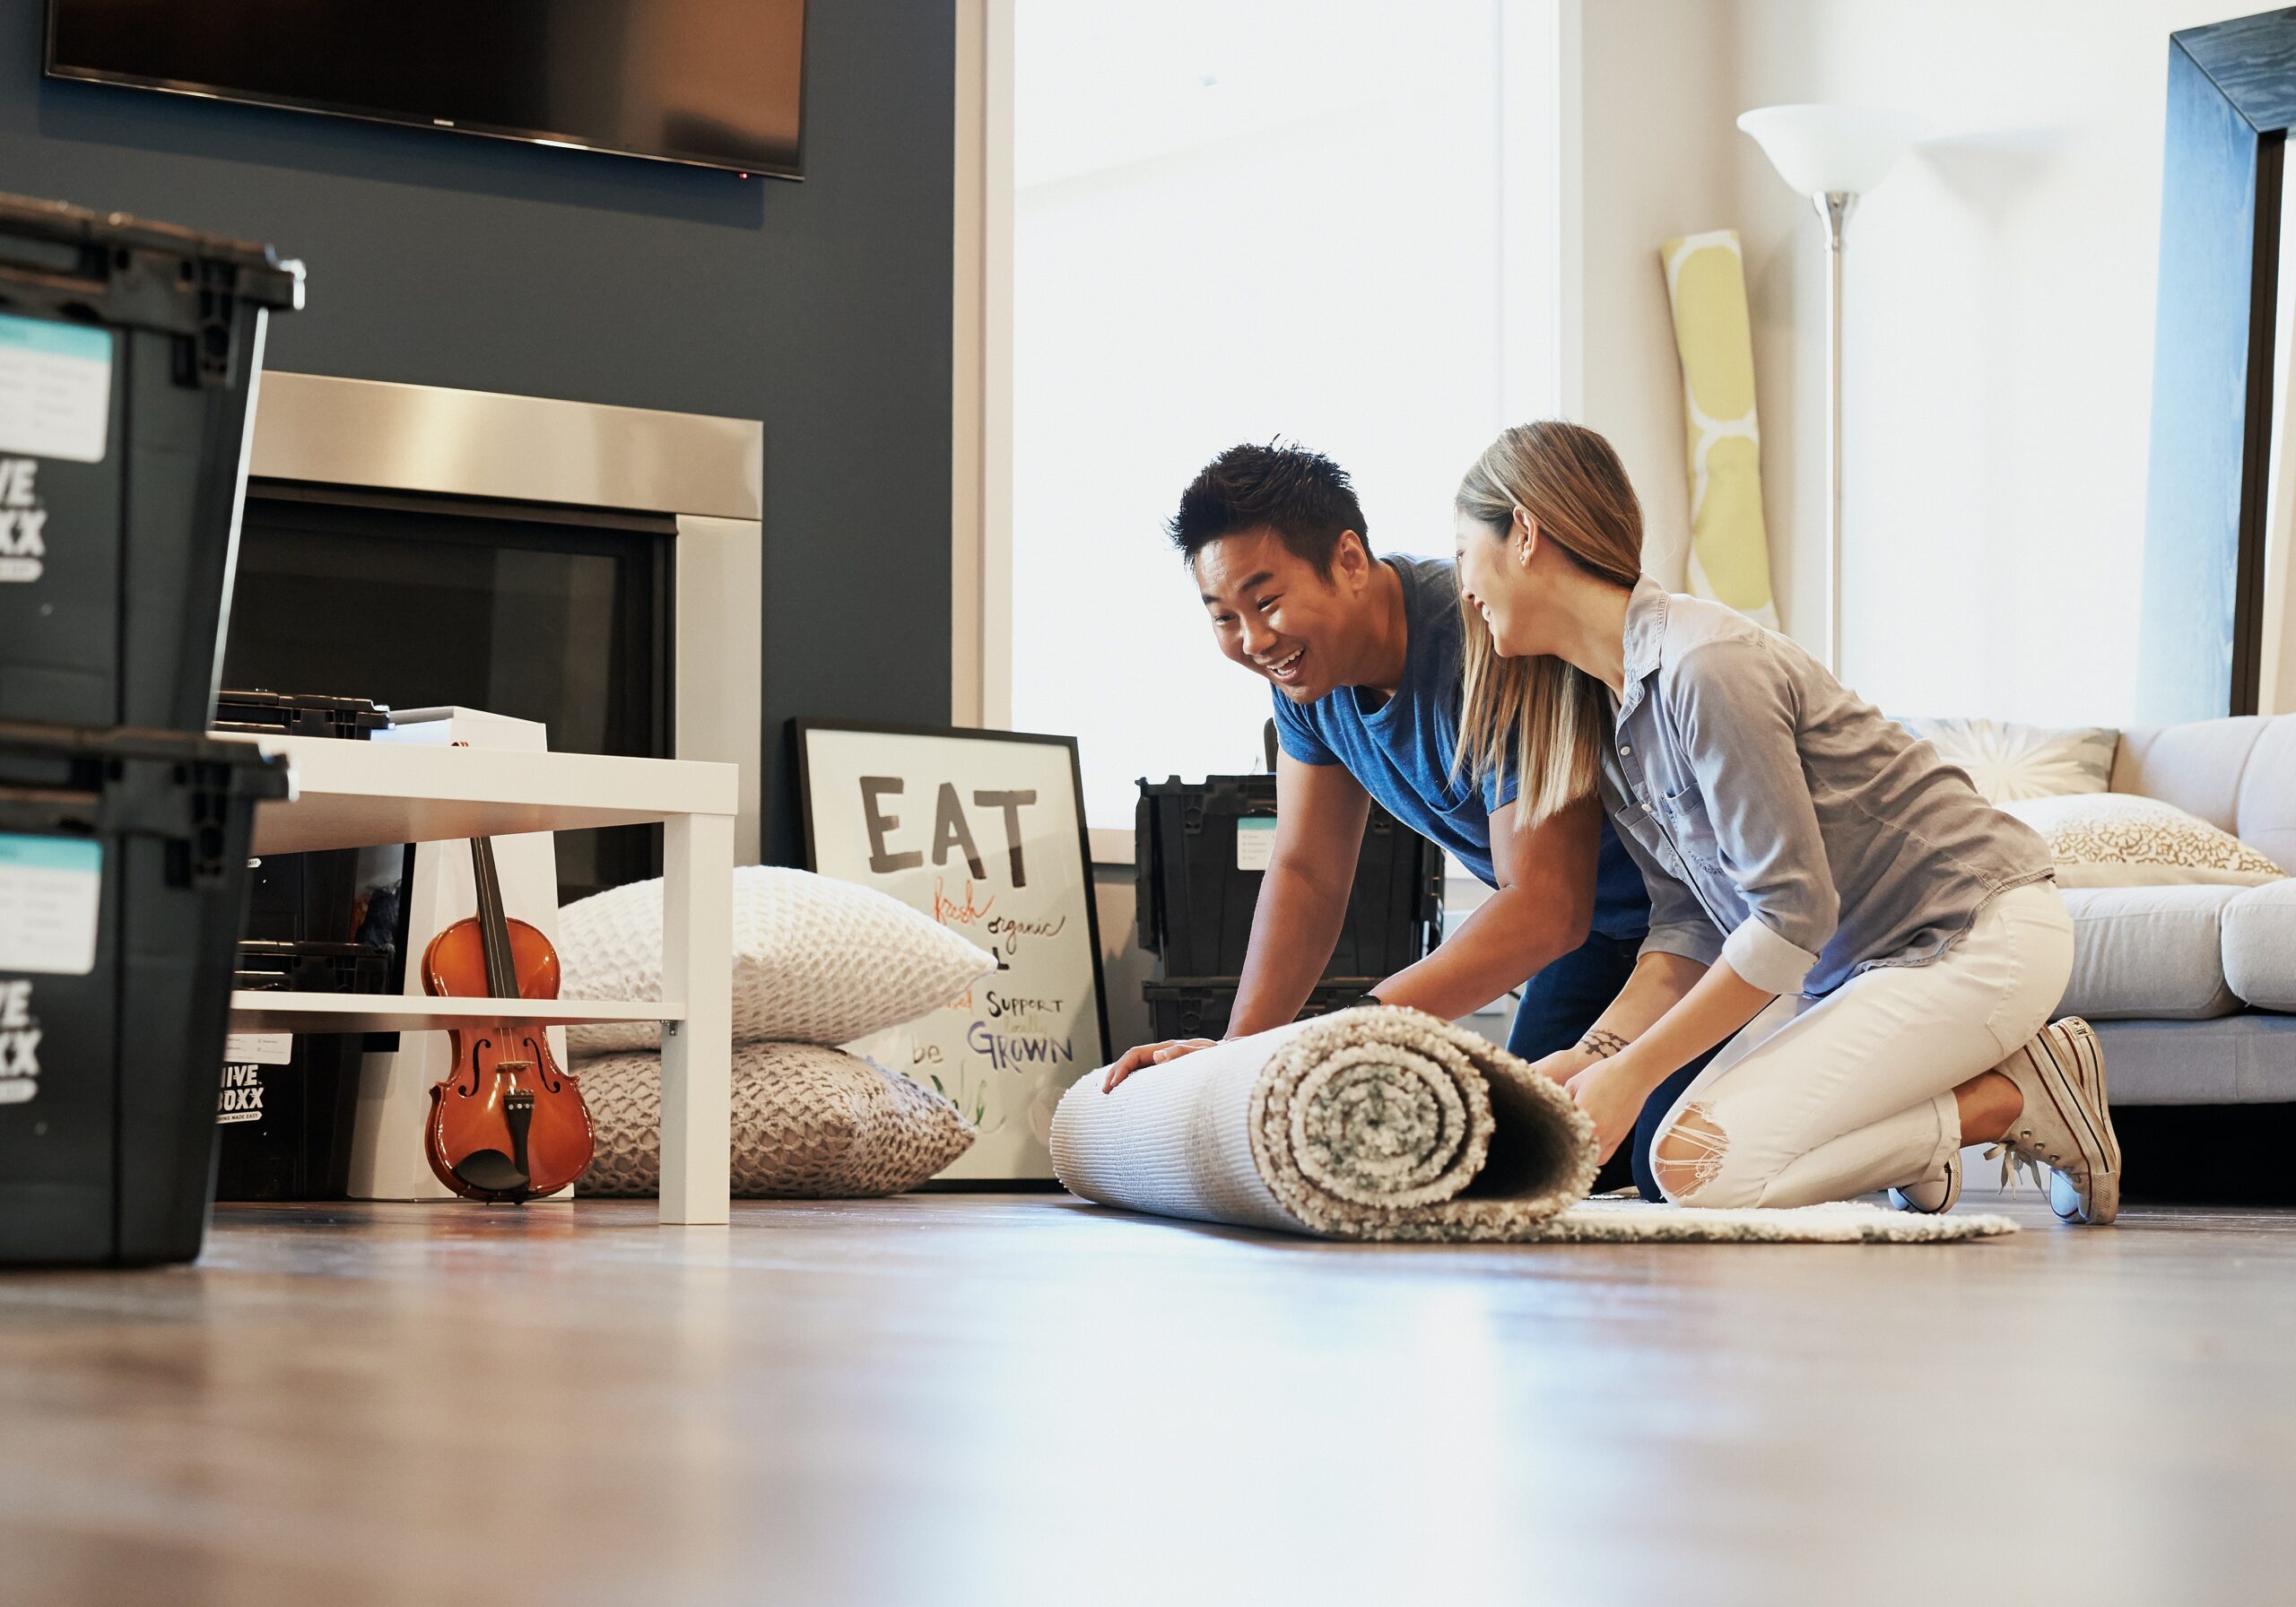 man in blue shirt and woman in sweater unrolling a rug on a wooden floor